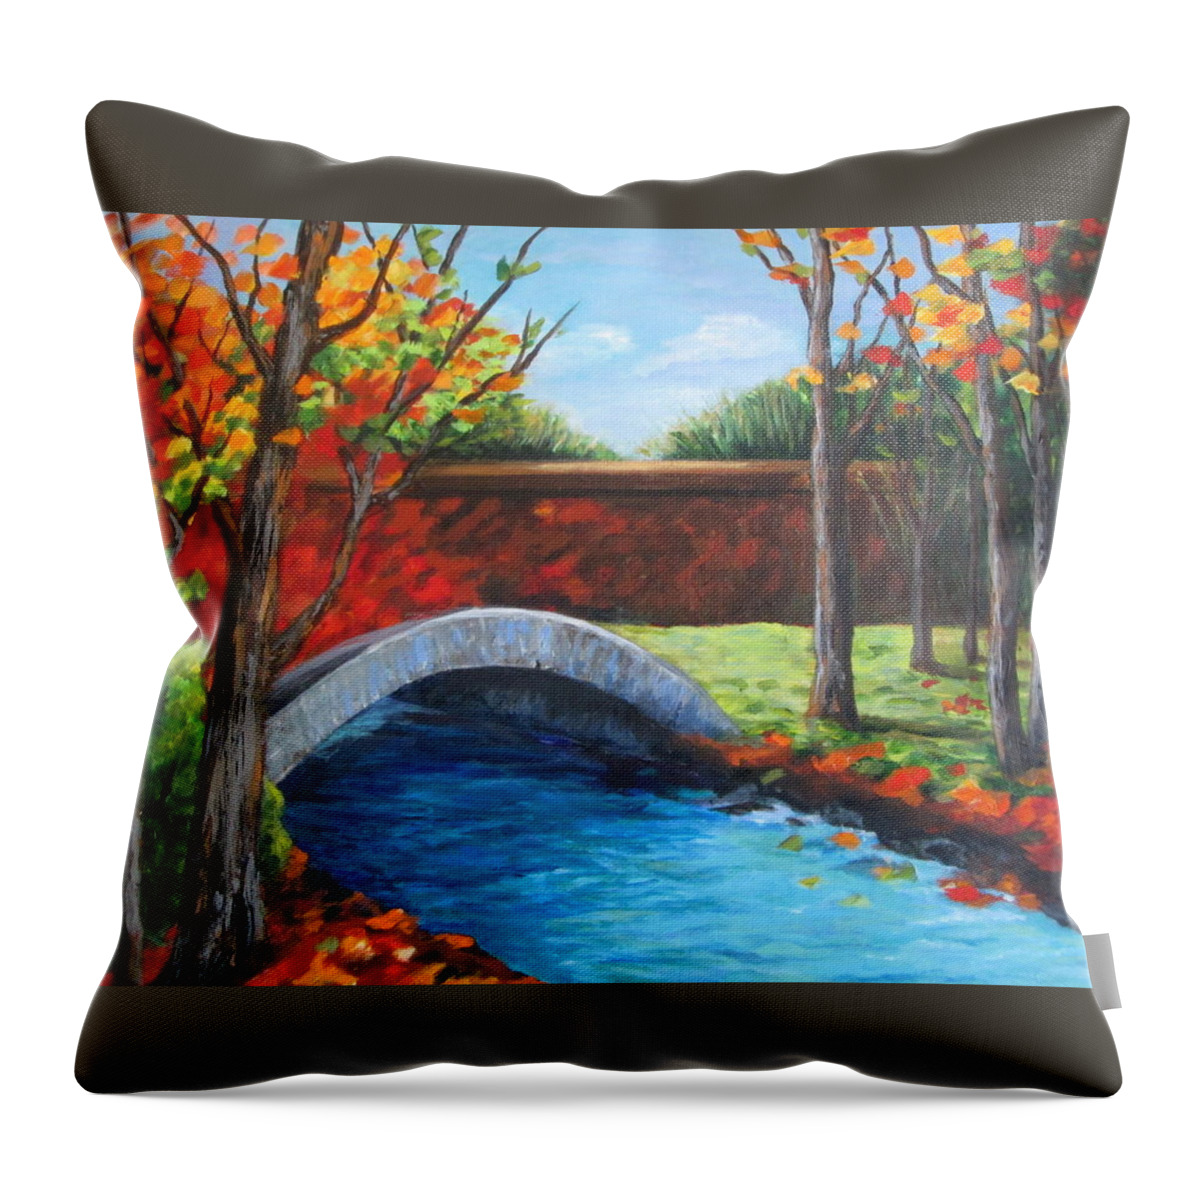 Landscape Throw Pillow featuring the painting By the Bridge by Rosie Sherman